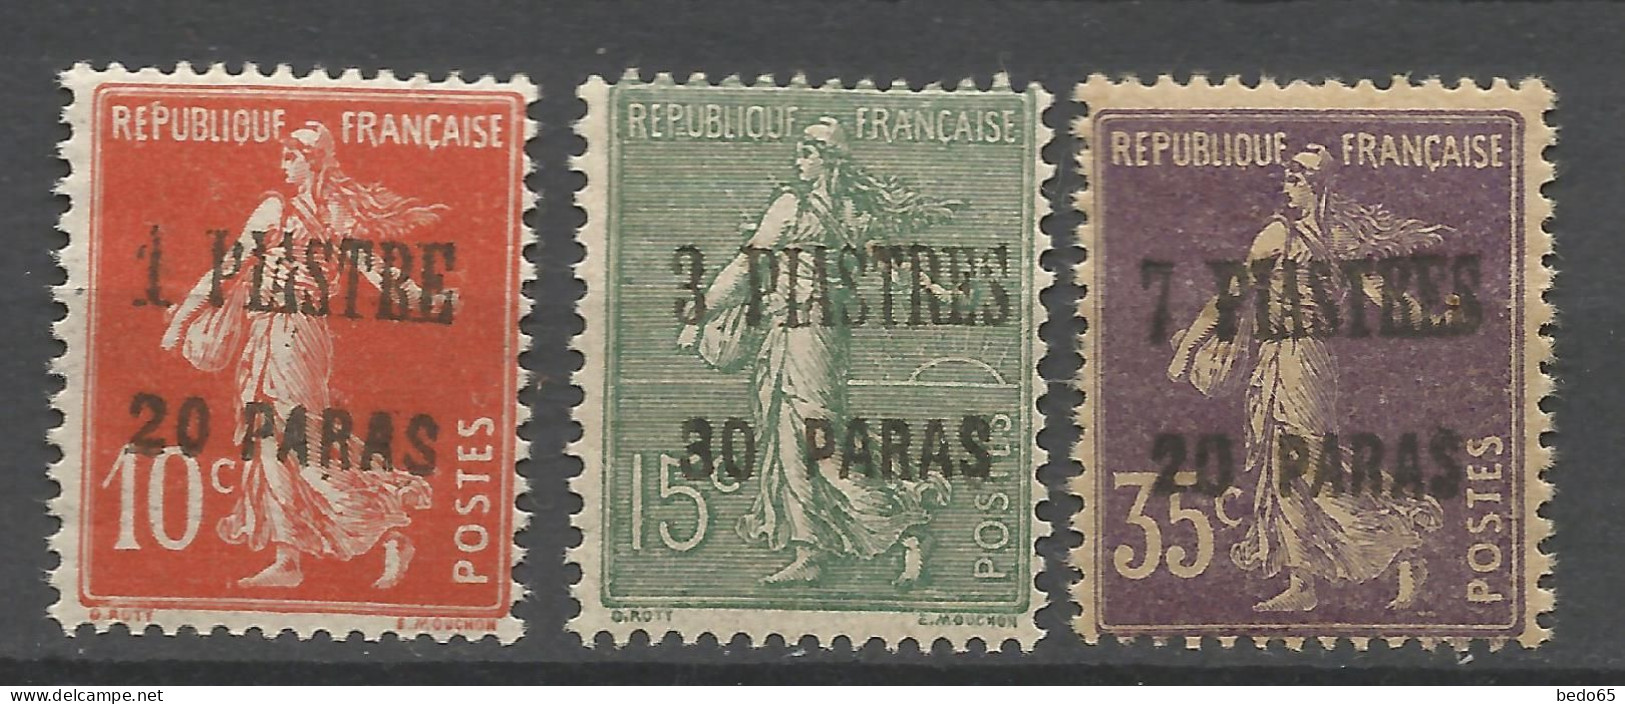 LEVANT N° 38 à 40  NEUF** LUXE SANS CHARNIERE  / Hingeless / MNH - Nuovi